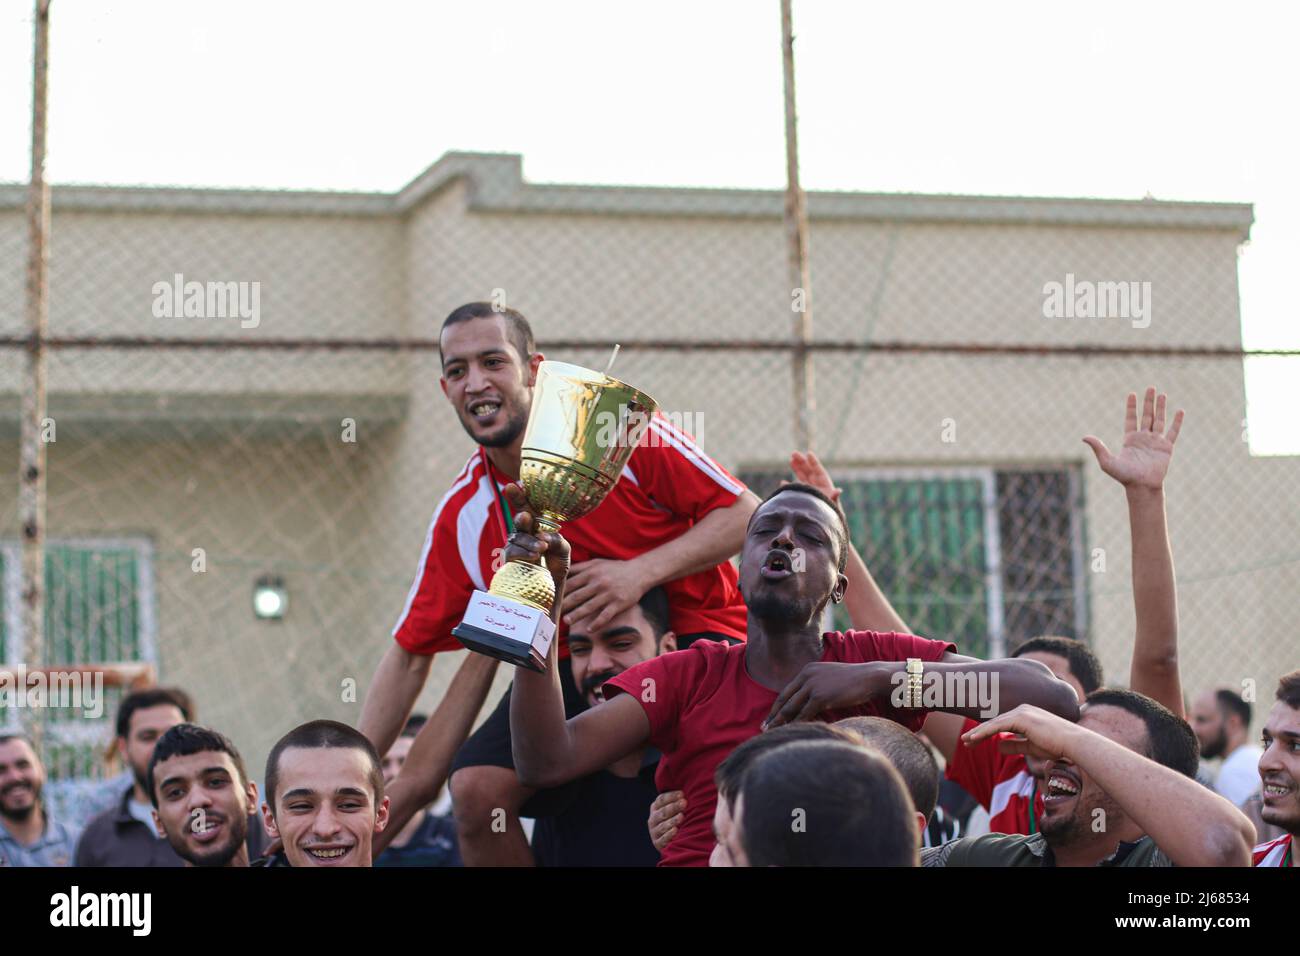 The Libyan team holds the cup after its victory over the Nigerian team in the Ramadan Football League for the inmates of Al-Sakt Prison in Misurata Stock Photo